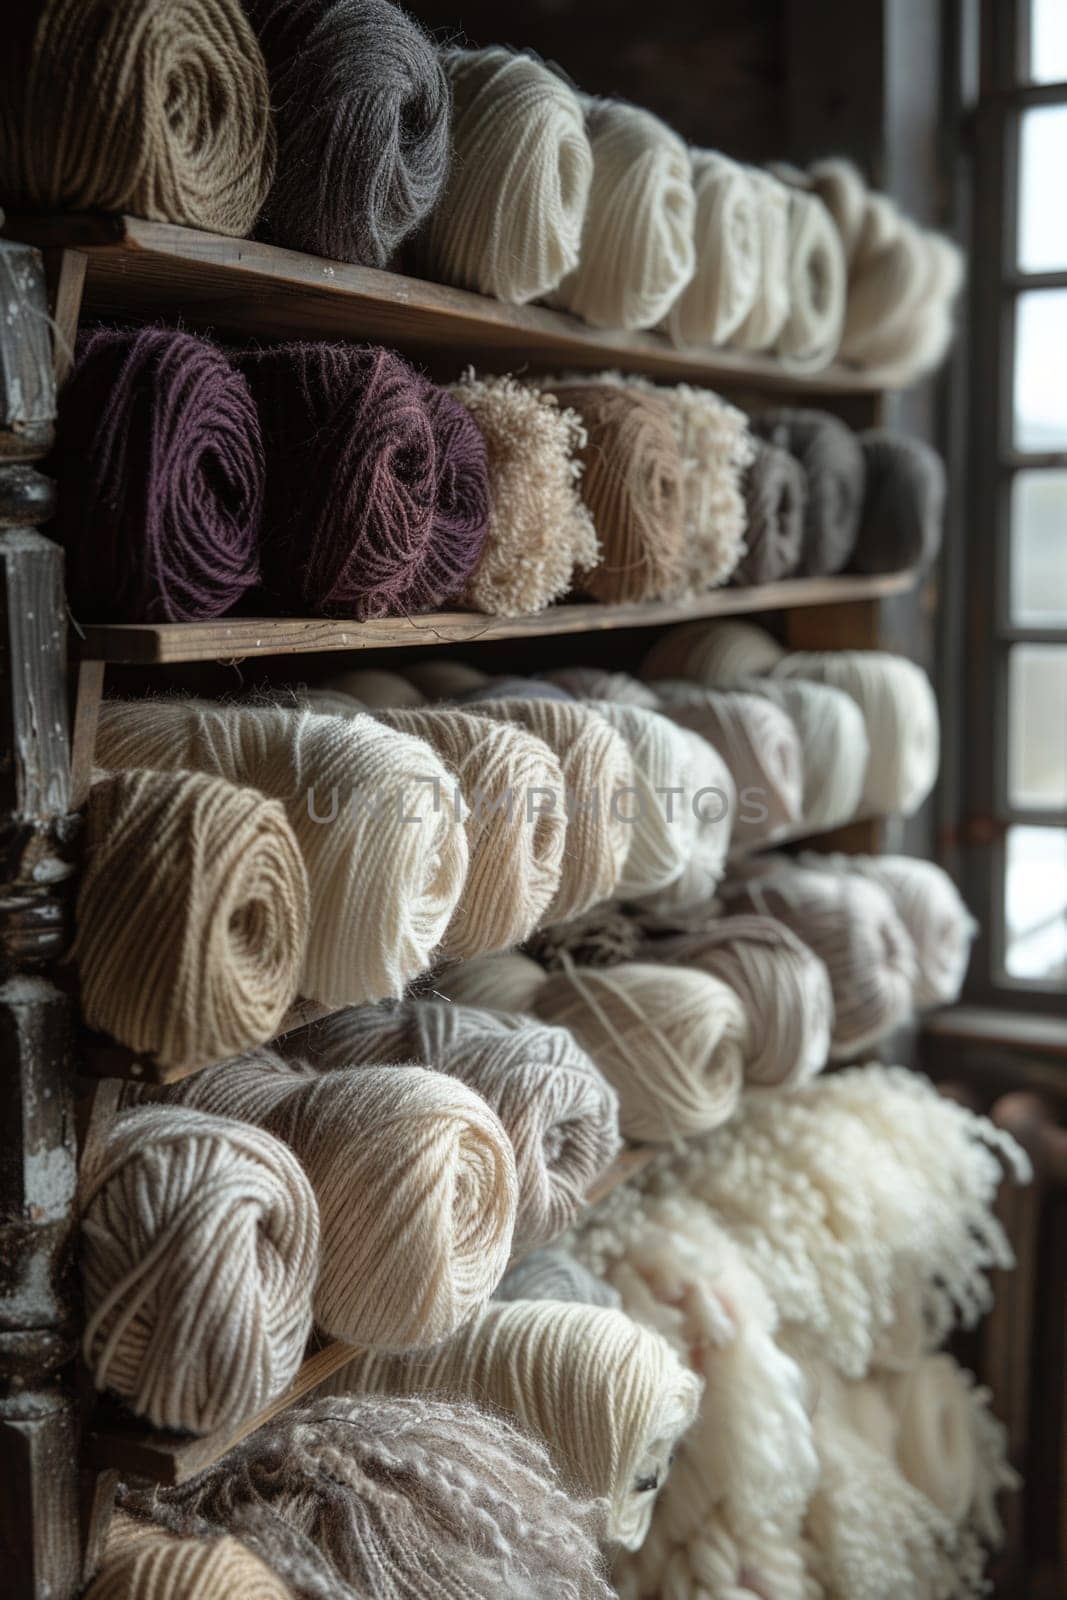 Assortment of Yarn on Display in Store by but_photo